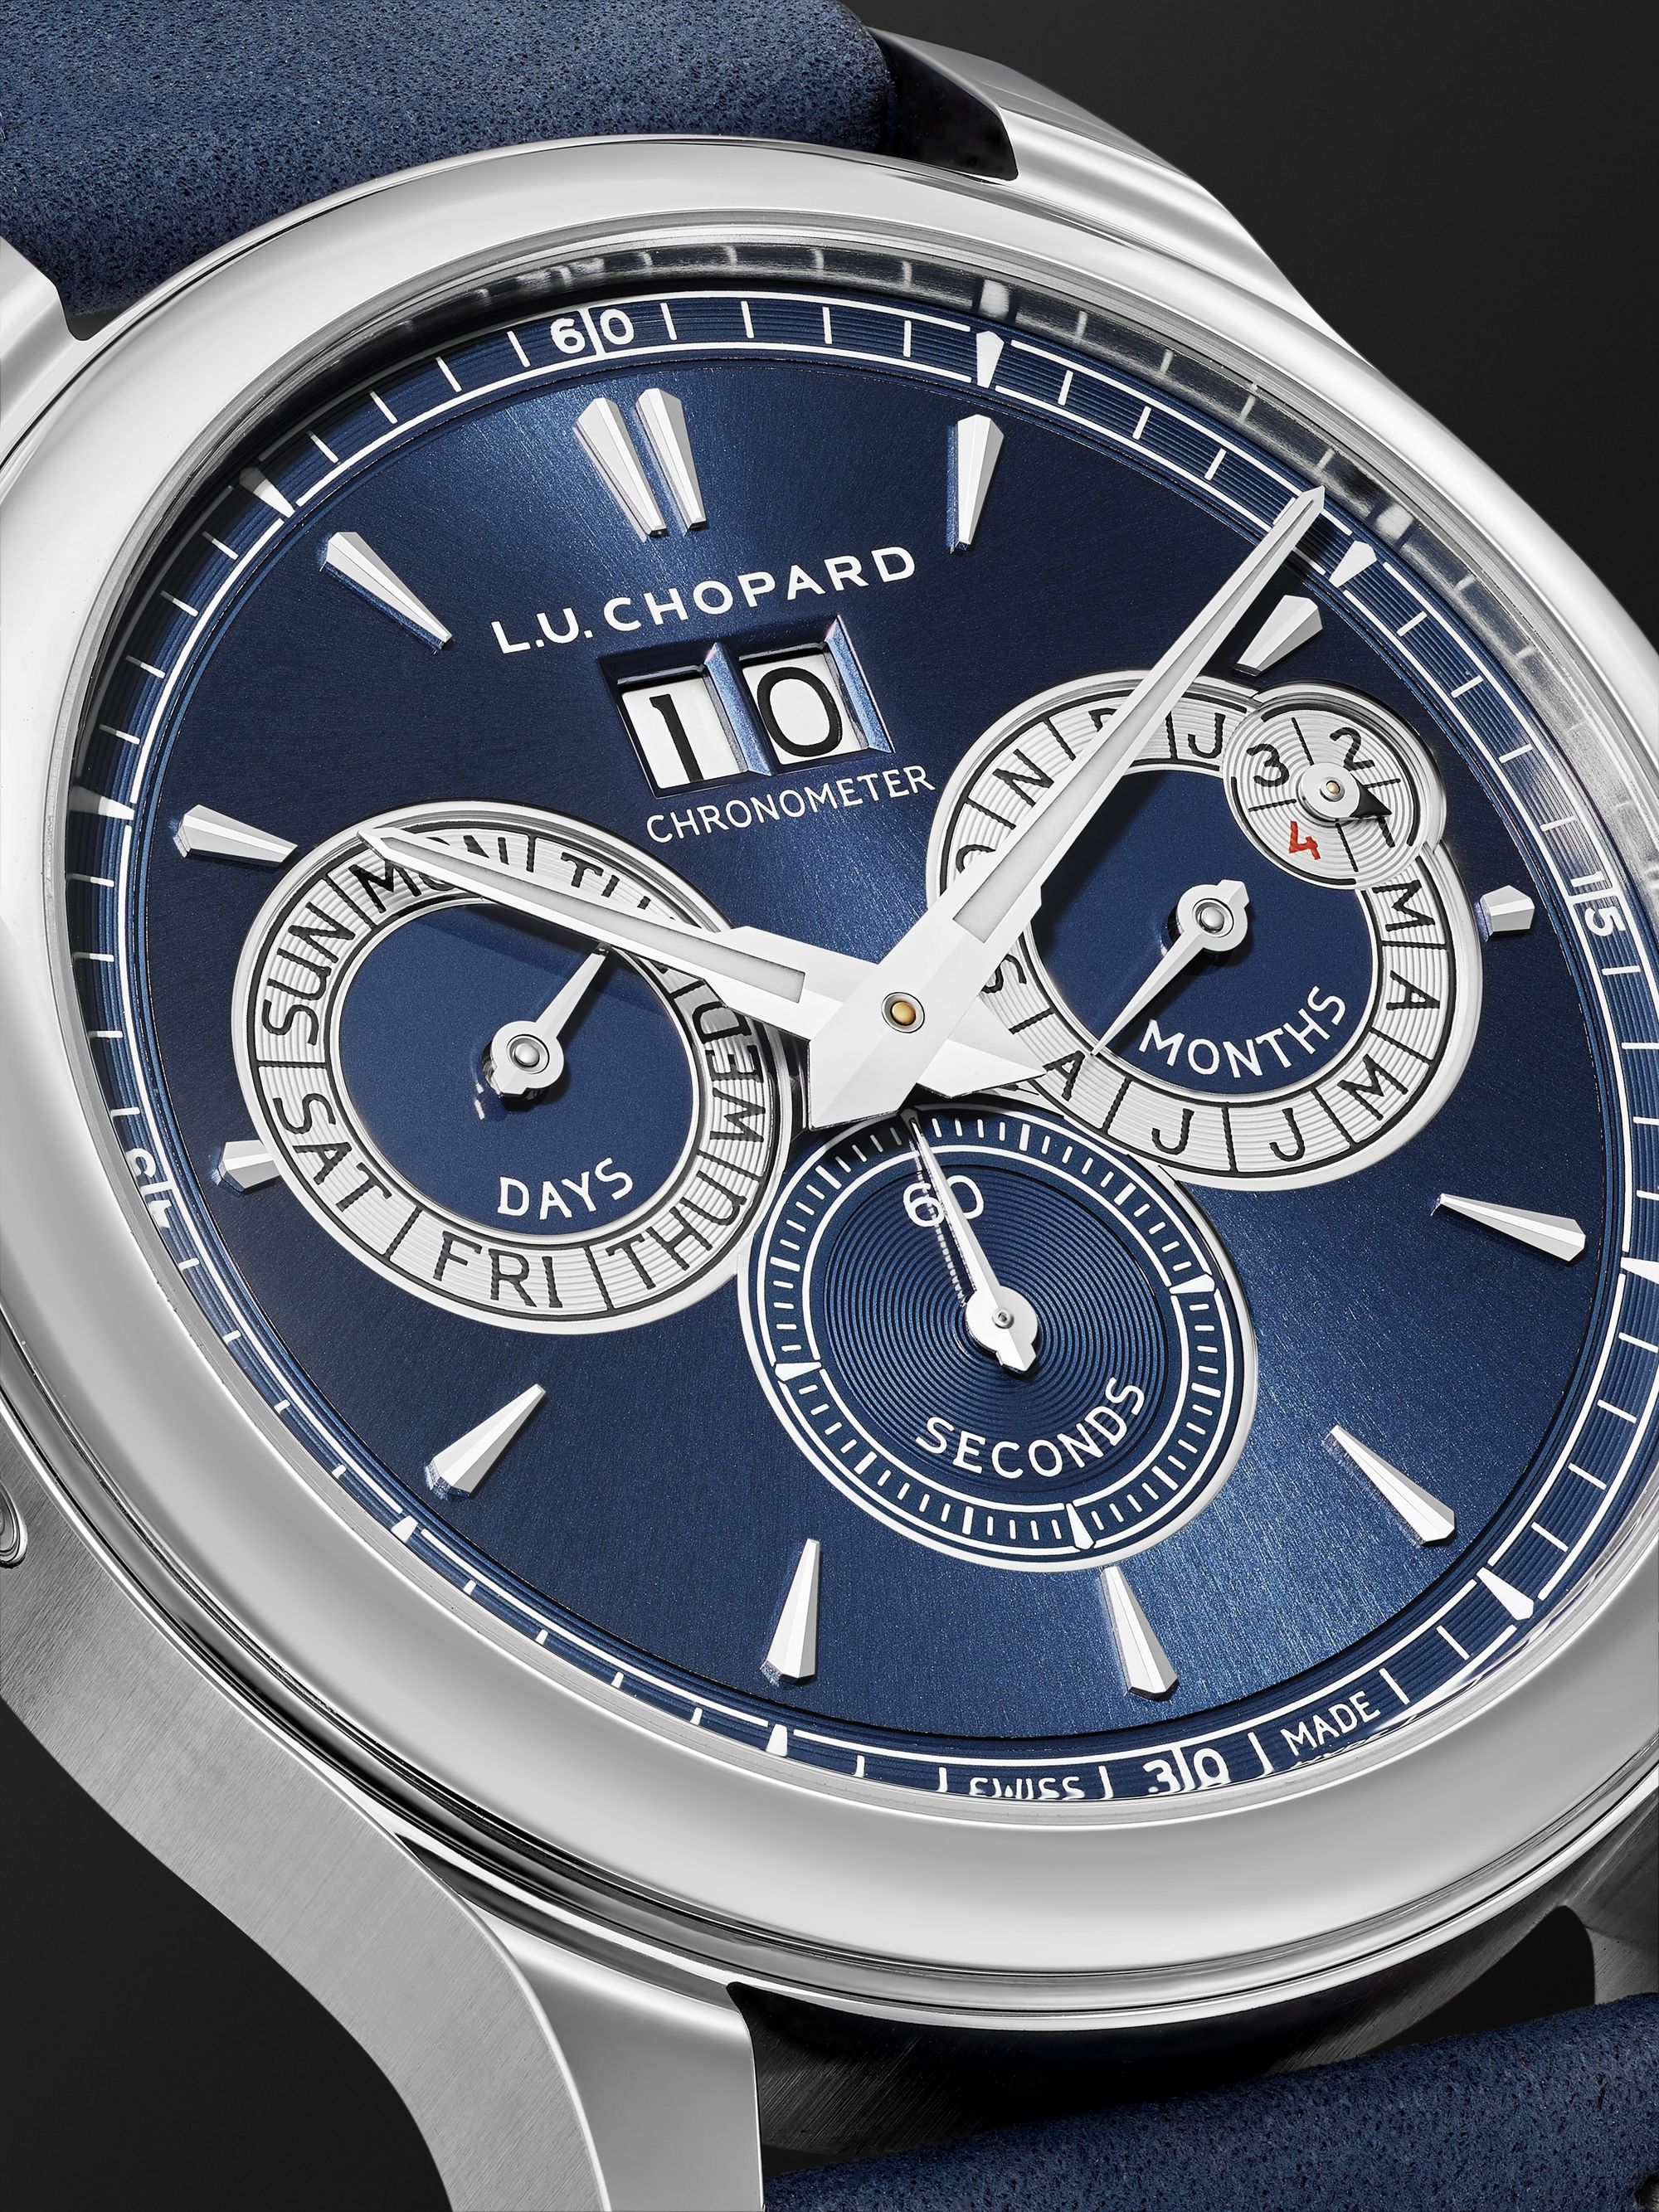 CHOPARD L.U.C Perpetual Twin Automatic Perpetual Calendar 43mm Stainless Steel and Nubuck Watch, Ref. No. 168561-3003